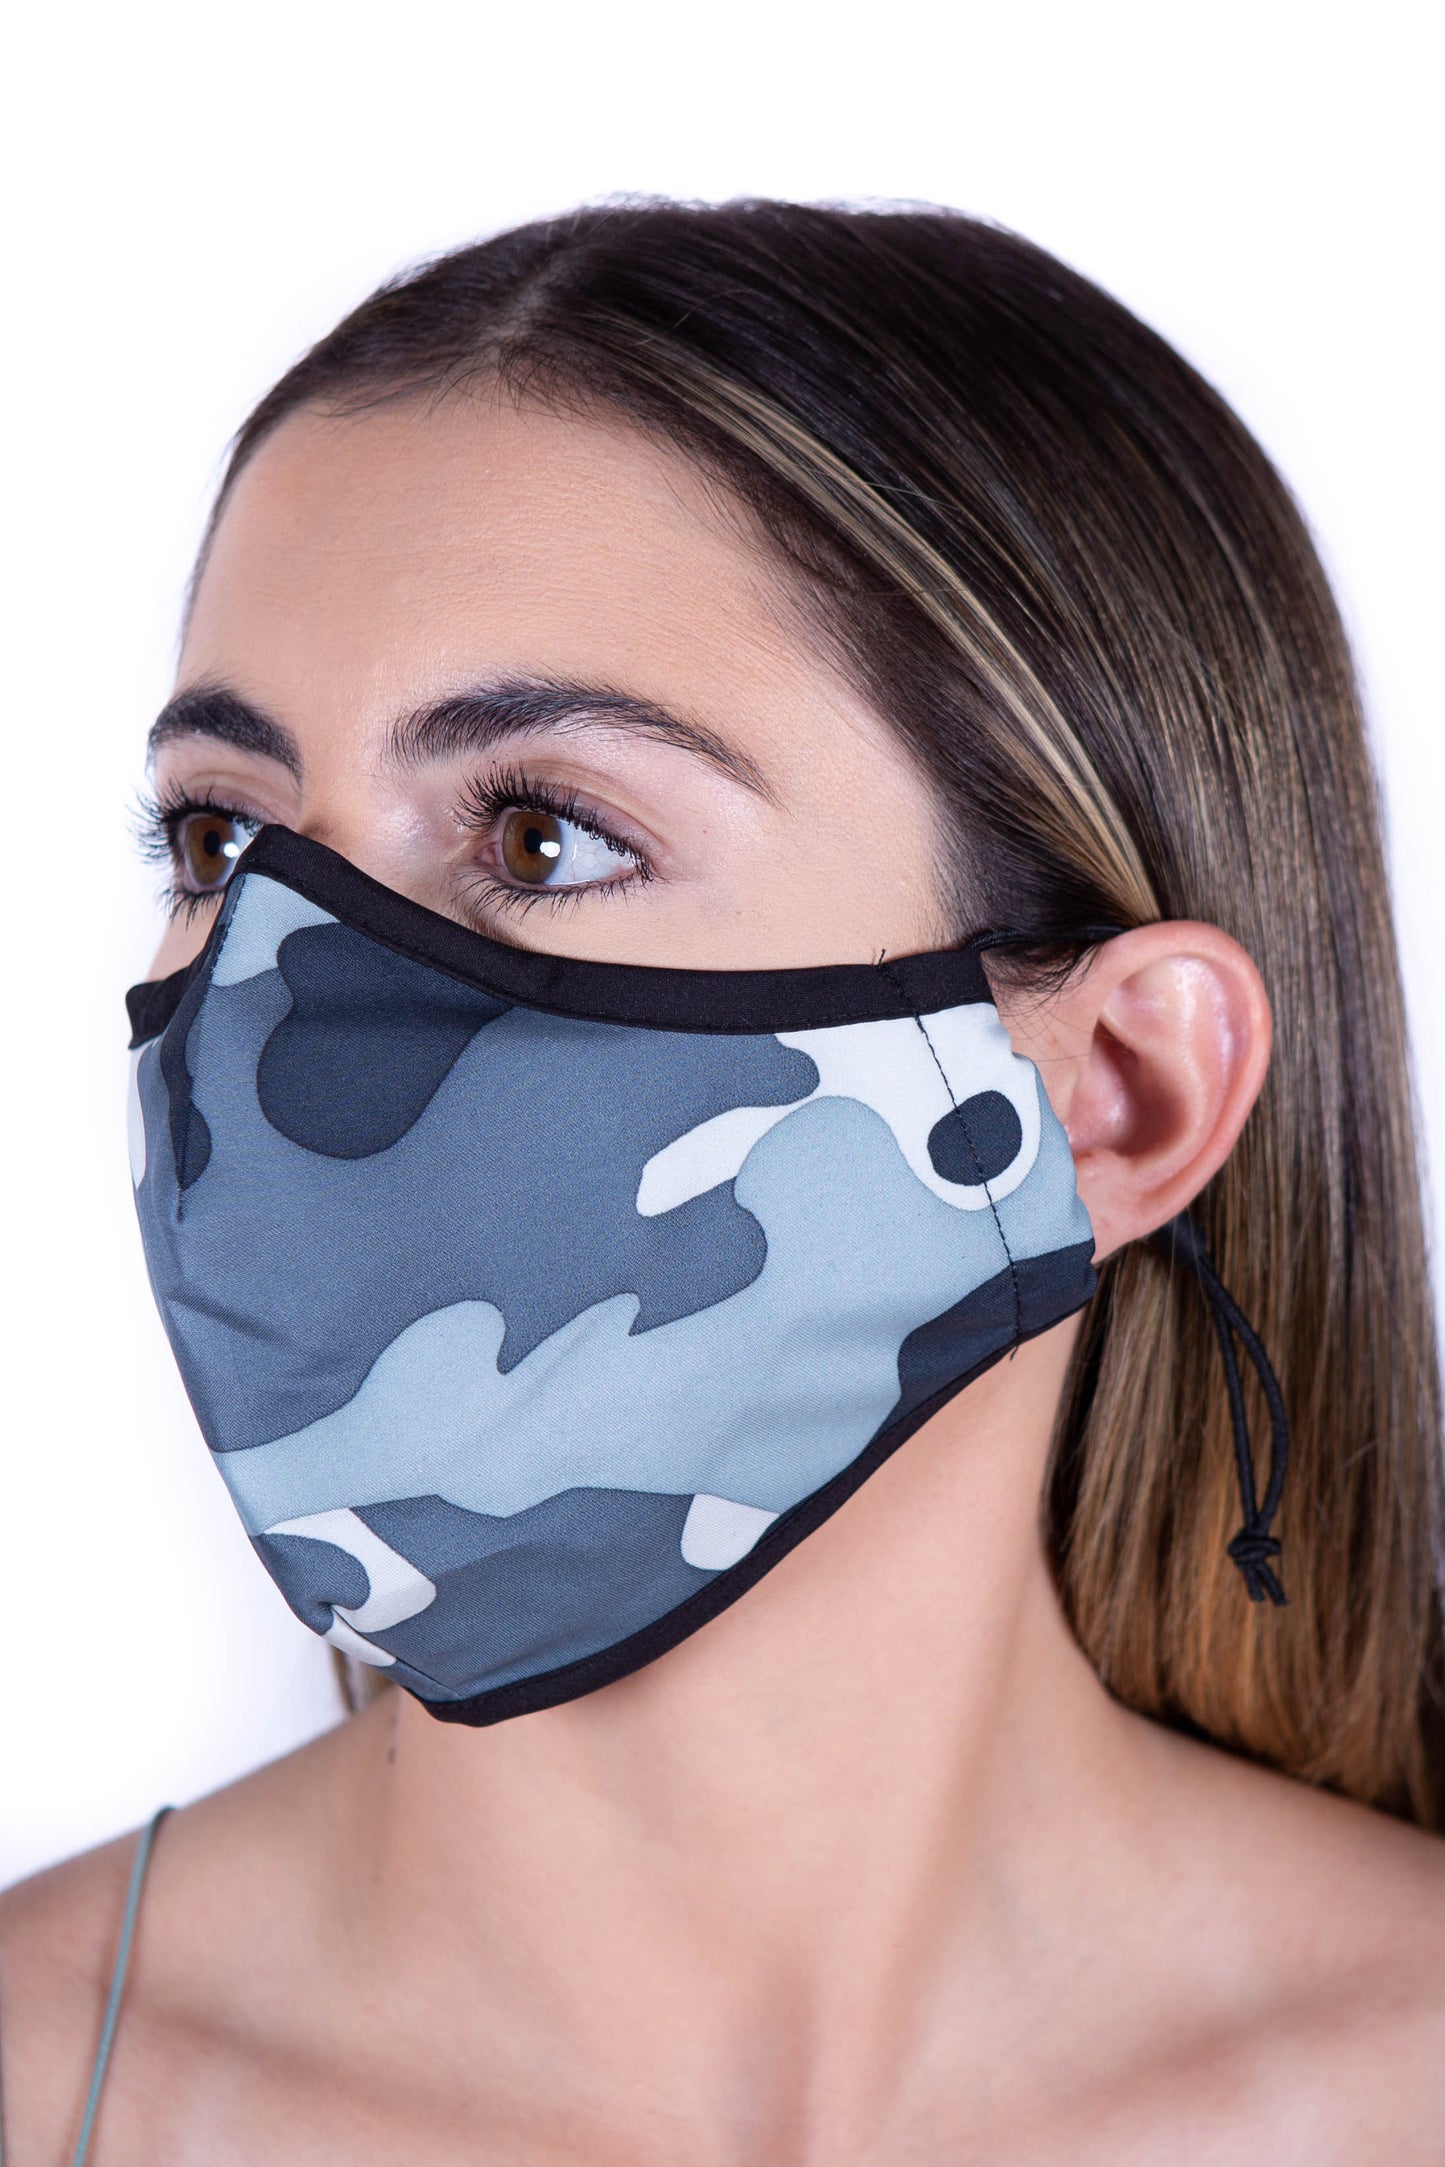 Low Profile 2 Layer Fabric Facemask: Nose Wire, Water Repellent, Washable & Breathable Face Mask w/Adjustable Sliders (8 Colors)